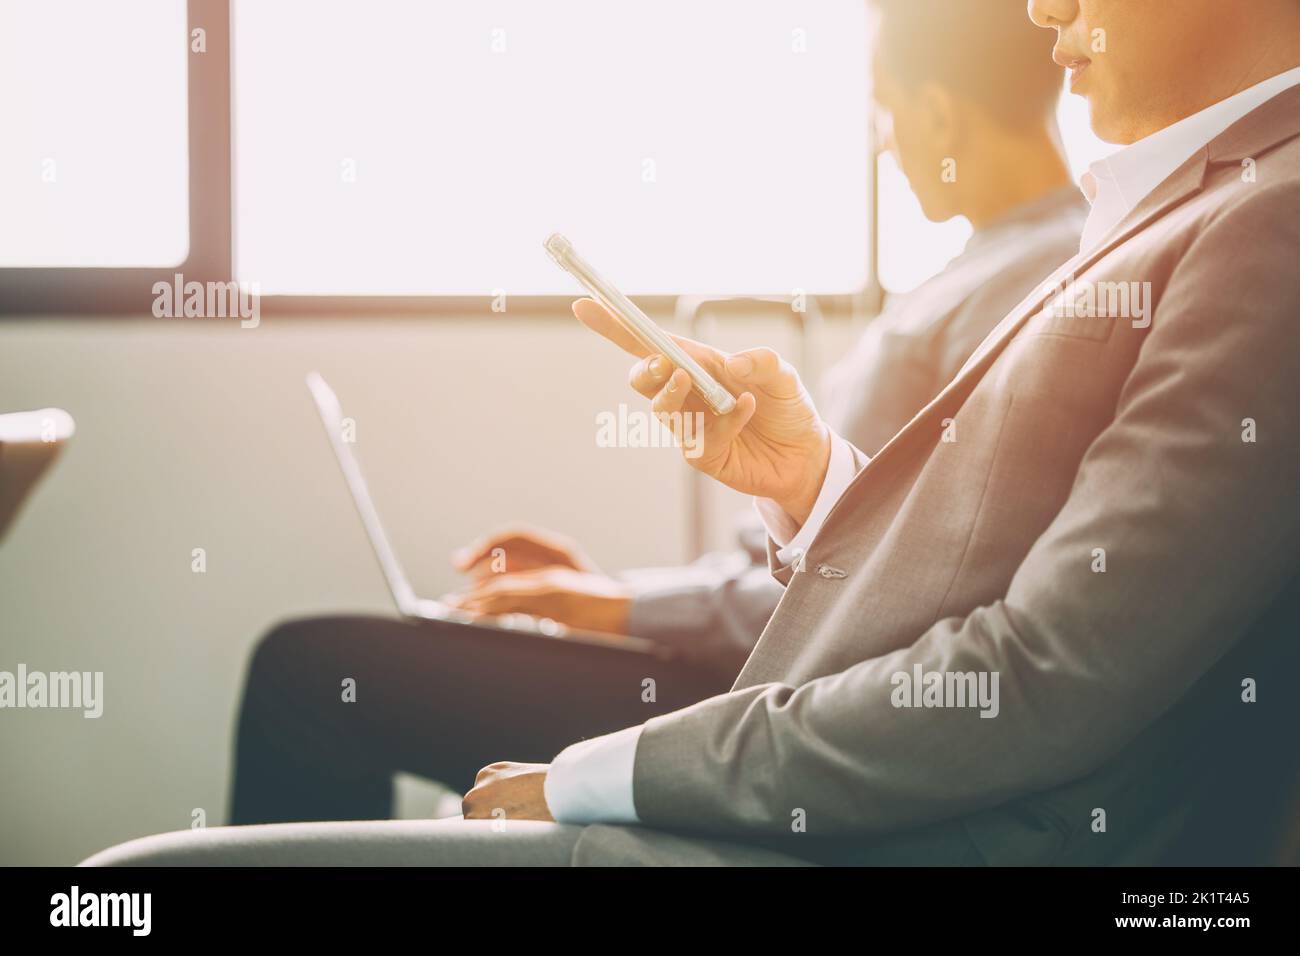 business man with modern people technology concept. two male businessman using laptop computer and smartphone in waiting area. Stock Photo